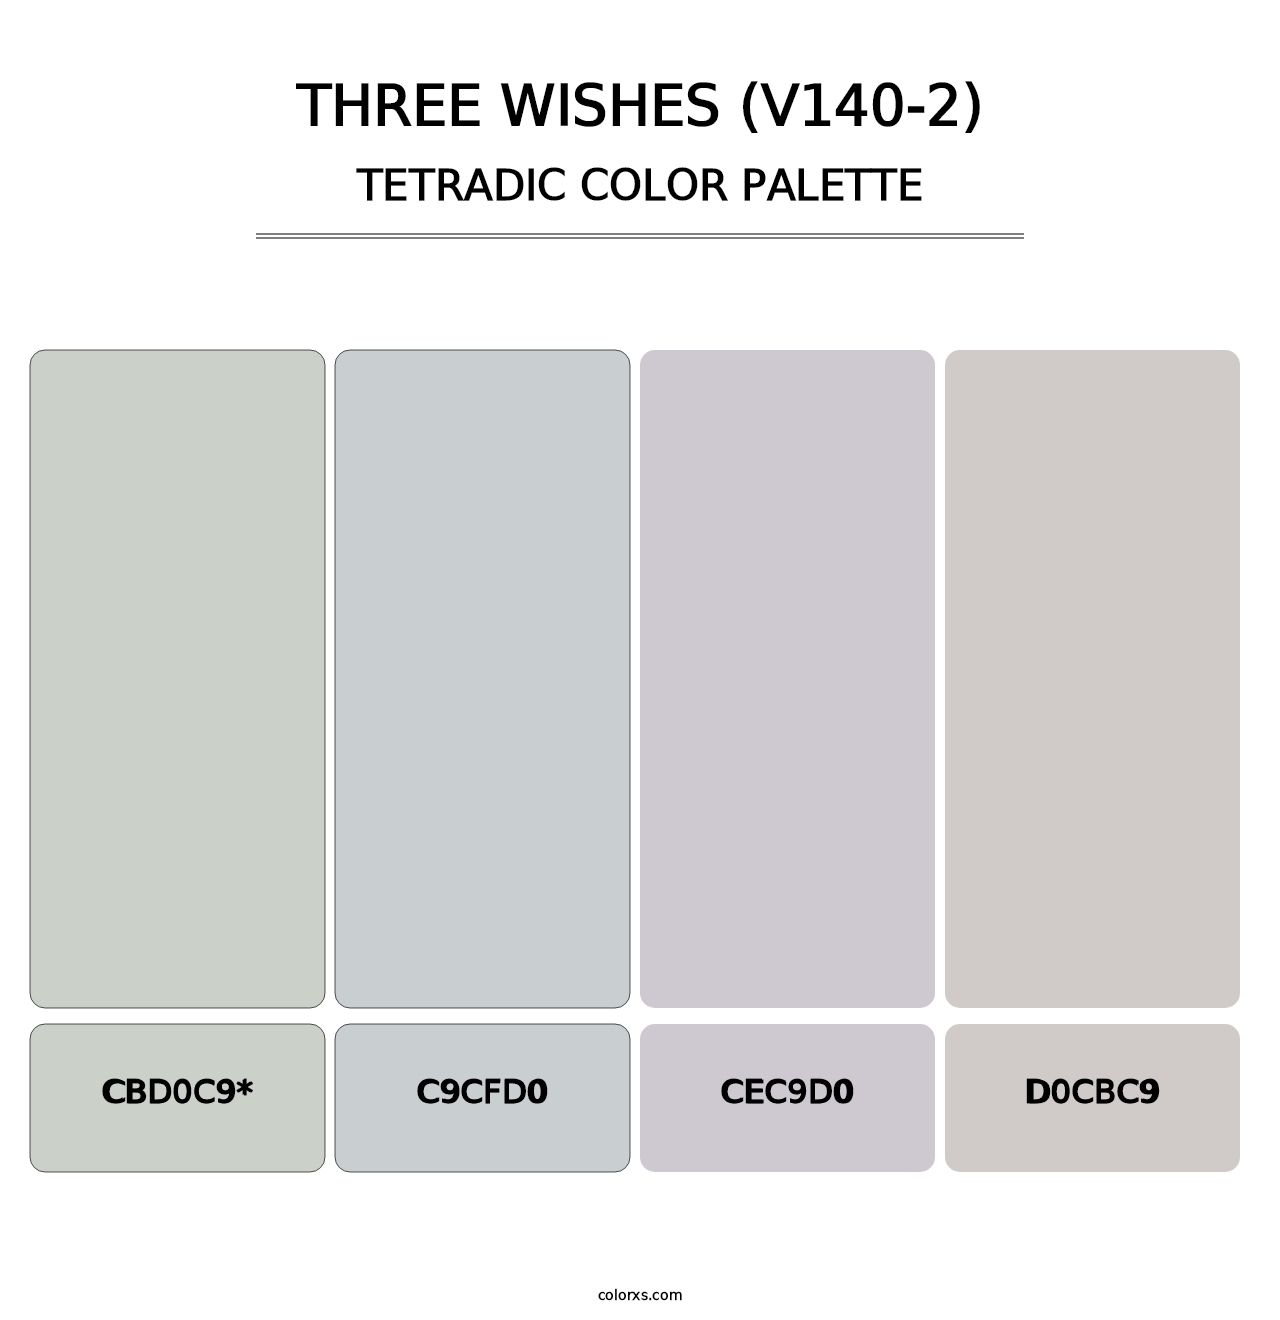 Three Wishes (V140-2) - Tetradic Color Palette